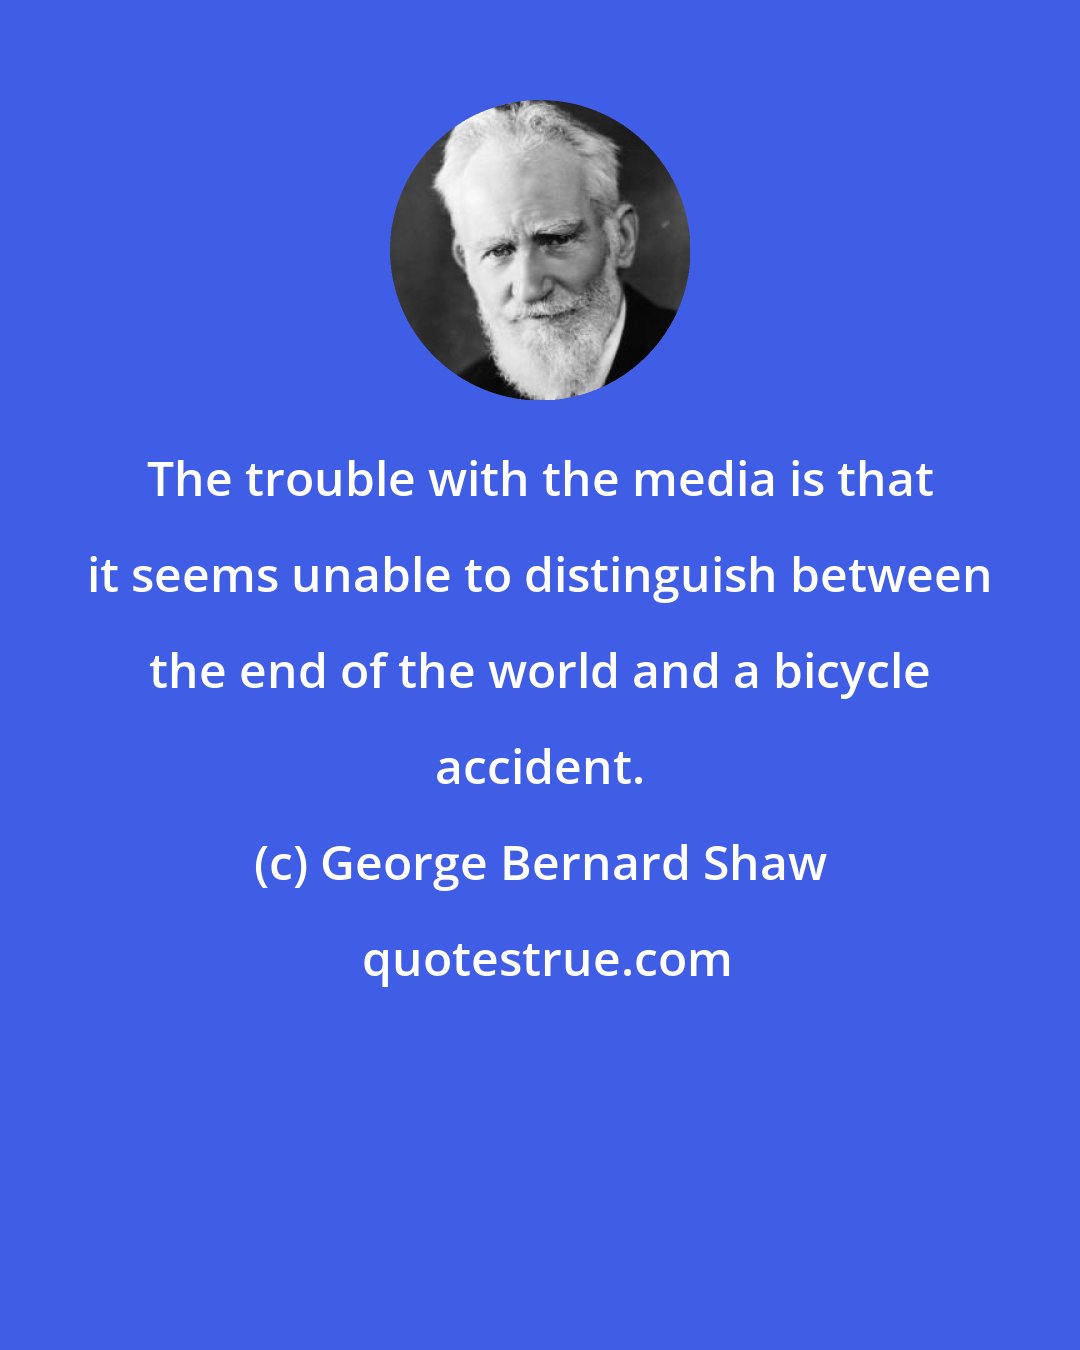 George Bernard Shaw: The trouble with the media is that it seems unable to distinguish between the end of the world and a bicycle accident.